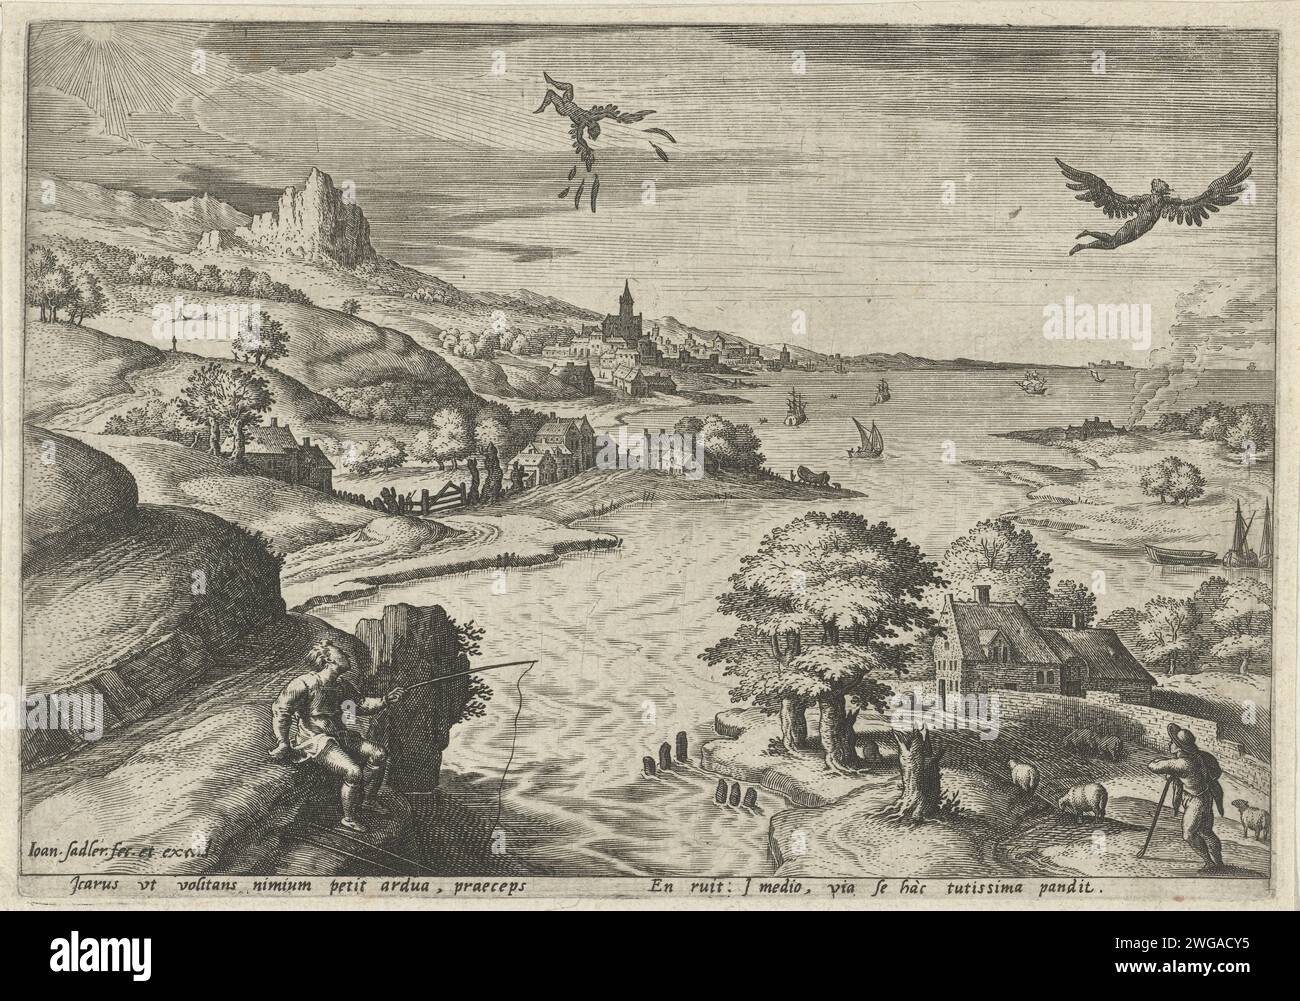 Val van Icarus, Johann Sadeler (I), after Gillis Mostaert (I), 1560 - 1600 print Landscape with a river. Daedalus and Icarus in the air. Icarus flies too high at the sun. The laundry of his wings melts and it falls from the sky. In the foreground, a fisherman (left) looks at the scene, while a shepherd also looks at the air. The first print of a six -part series of landscapes with mythological scenes. print maker: unknownafter drawing by: Antwerppublisher: unknown paper engraving death i.e. the fall of Icarus (Daedalus present). river Stock Photo